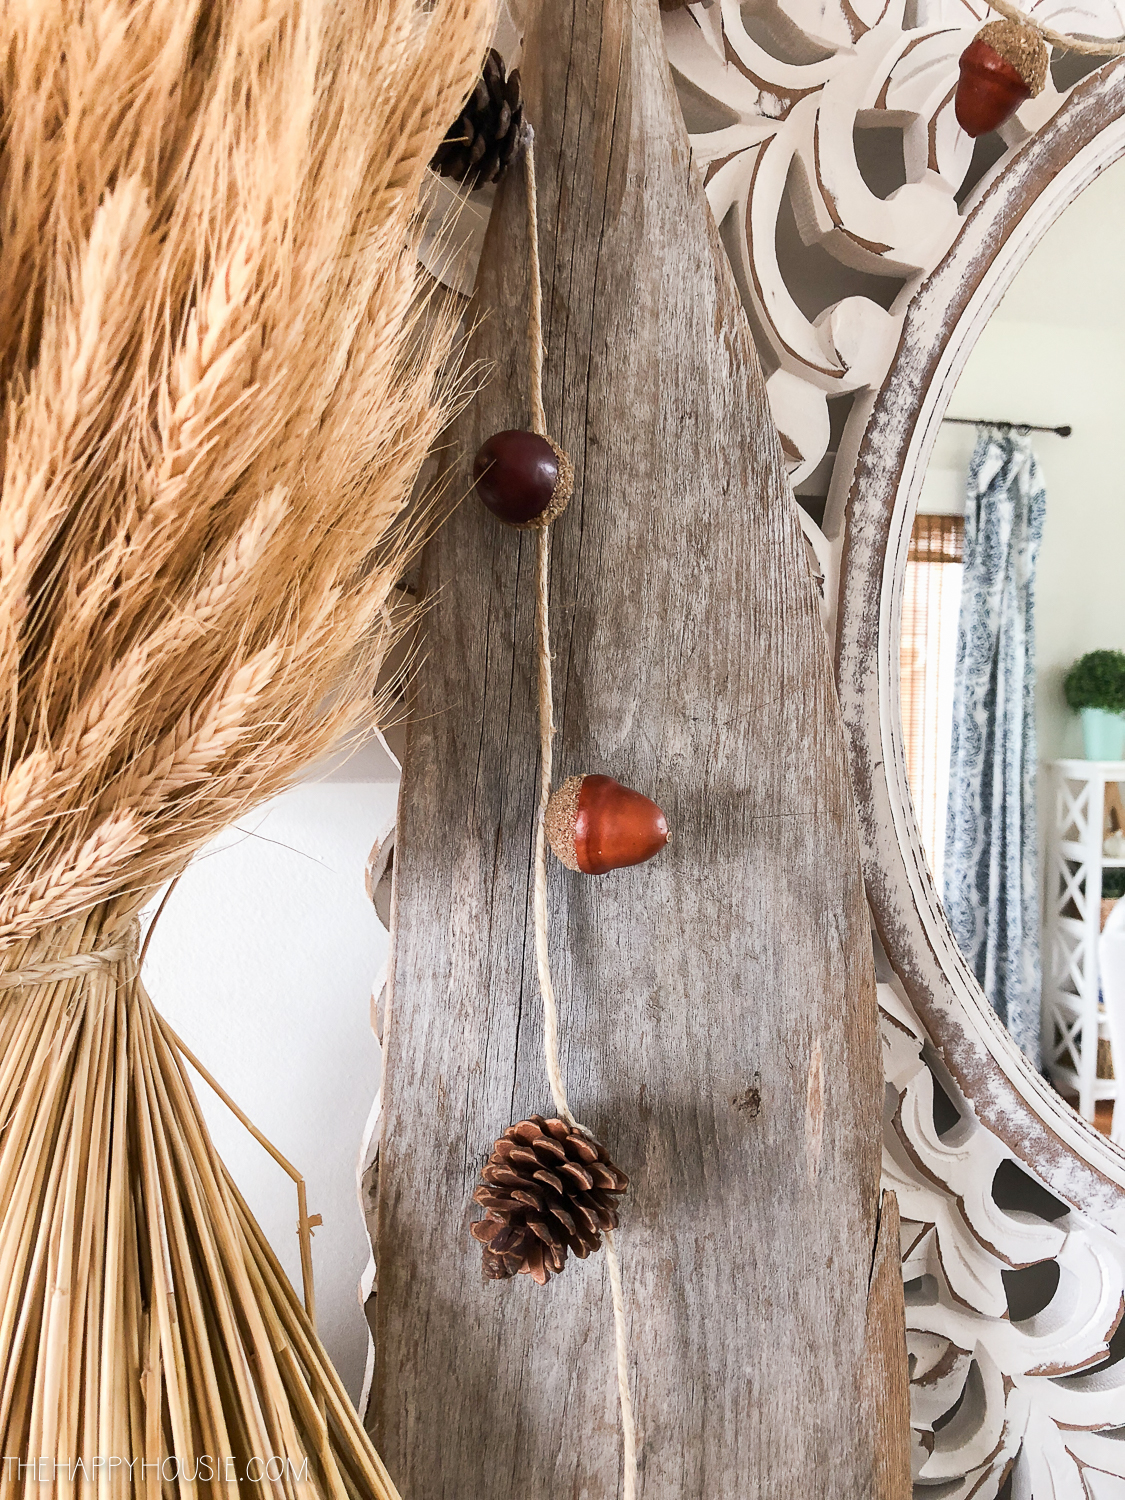 The acorn and pinecone garland strung up around the mirror in a fall vignette.